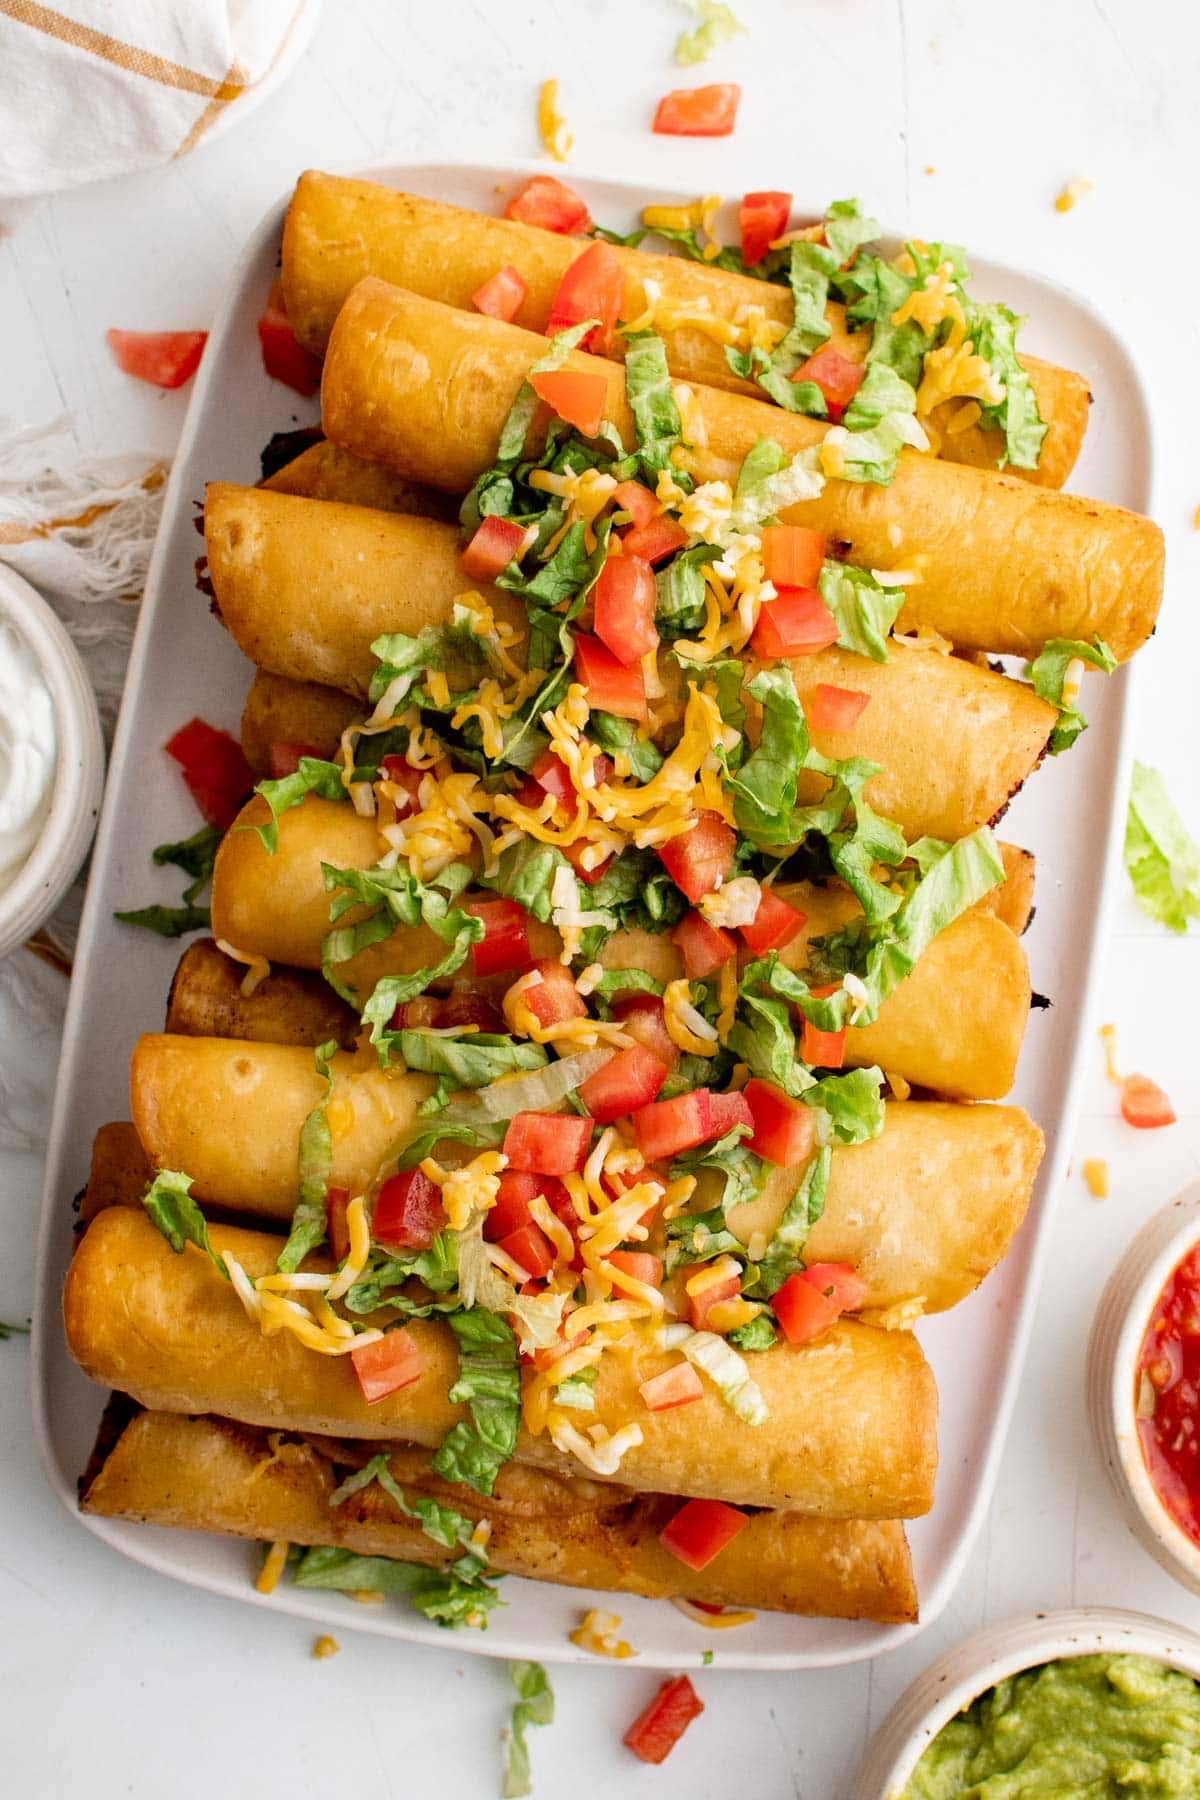 platter of chicken flautas, stacked and topped with tomatoes and shredded lettuces